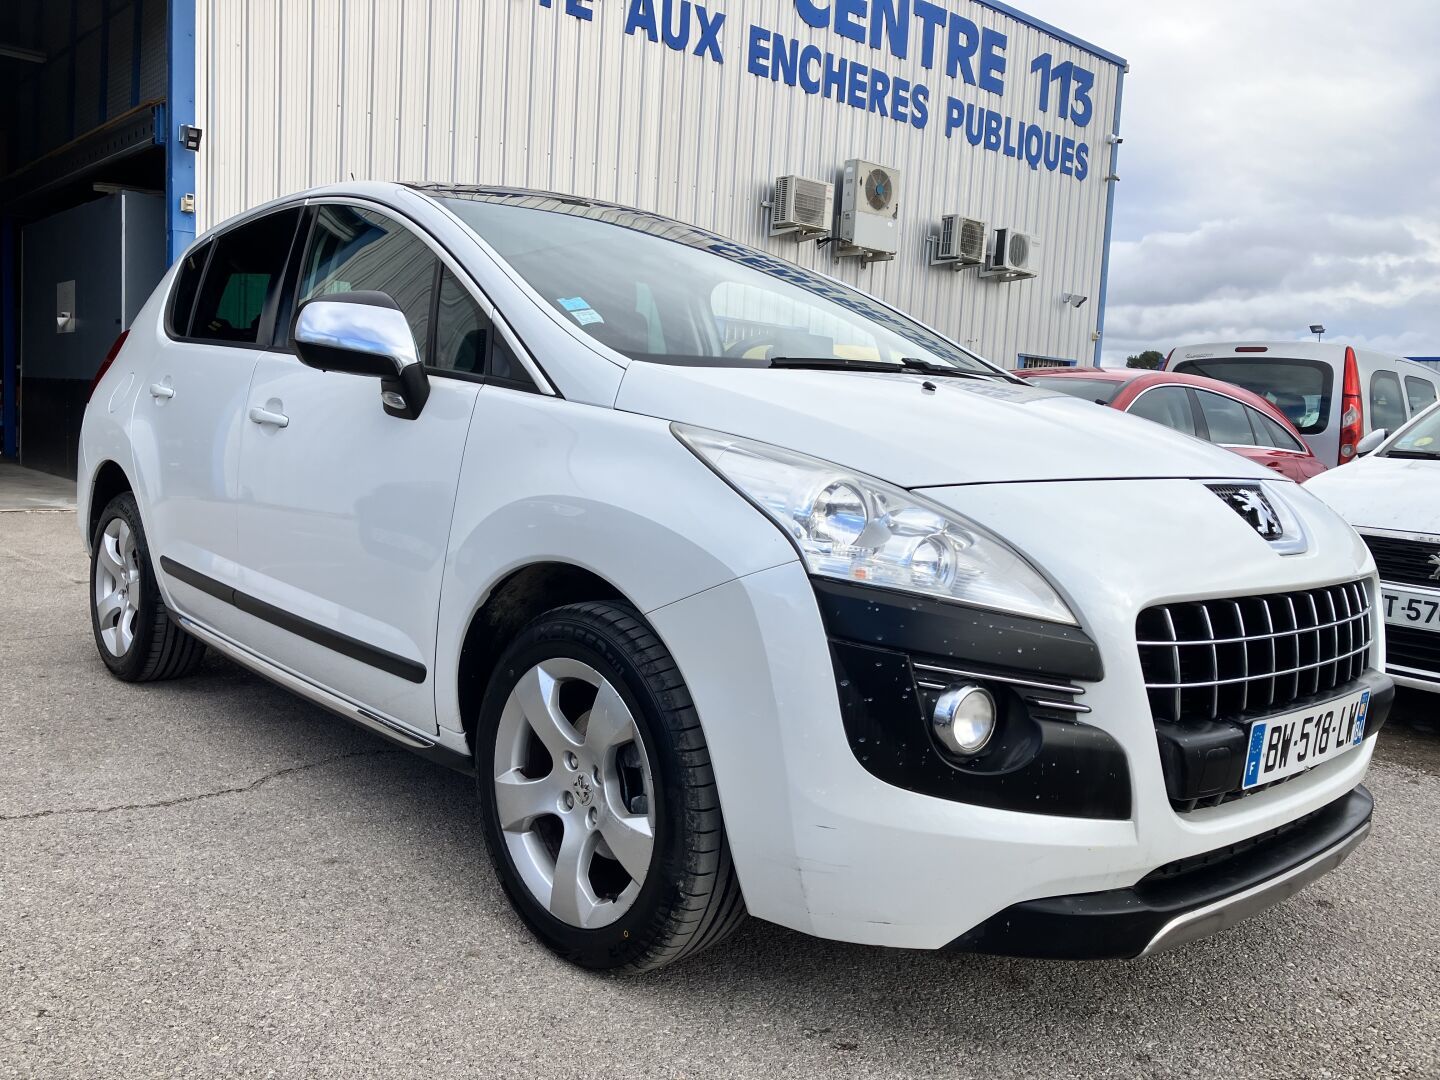 Null 3008 1.6 HDI 110 CH
VP PEUGEOT 3008 1.6 HDI 110 CH 1.6 HDI
Carrosserie : BR&hellip;